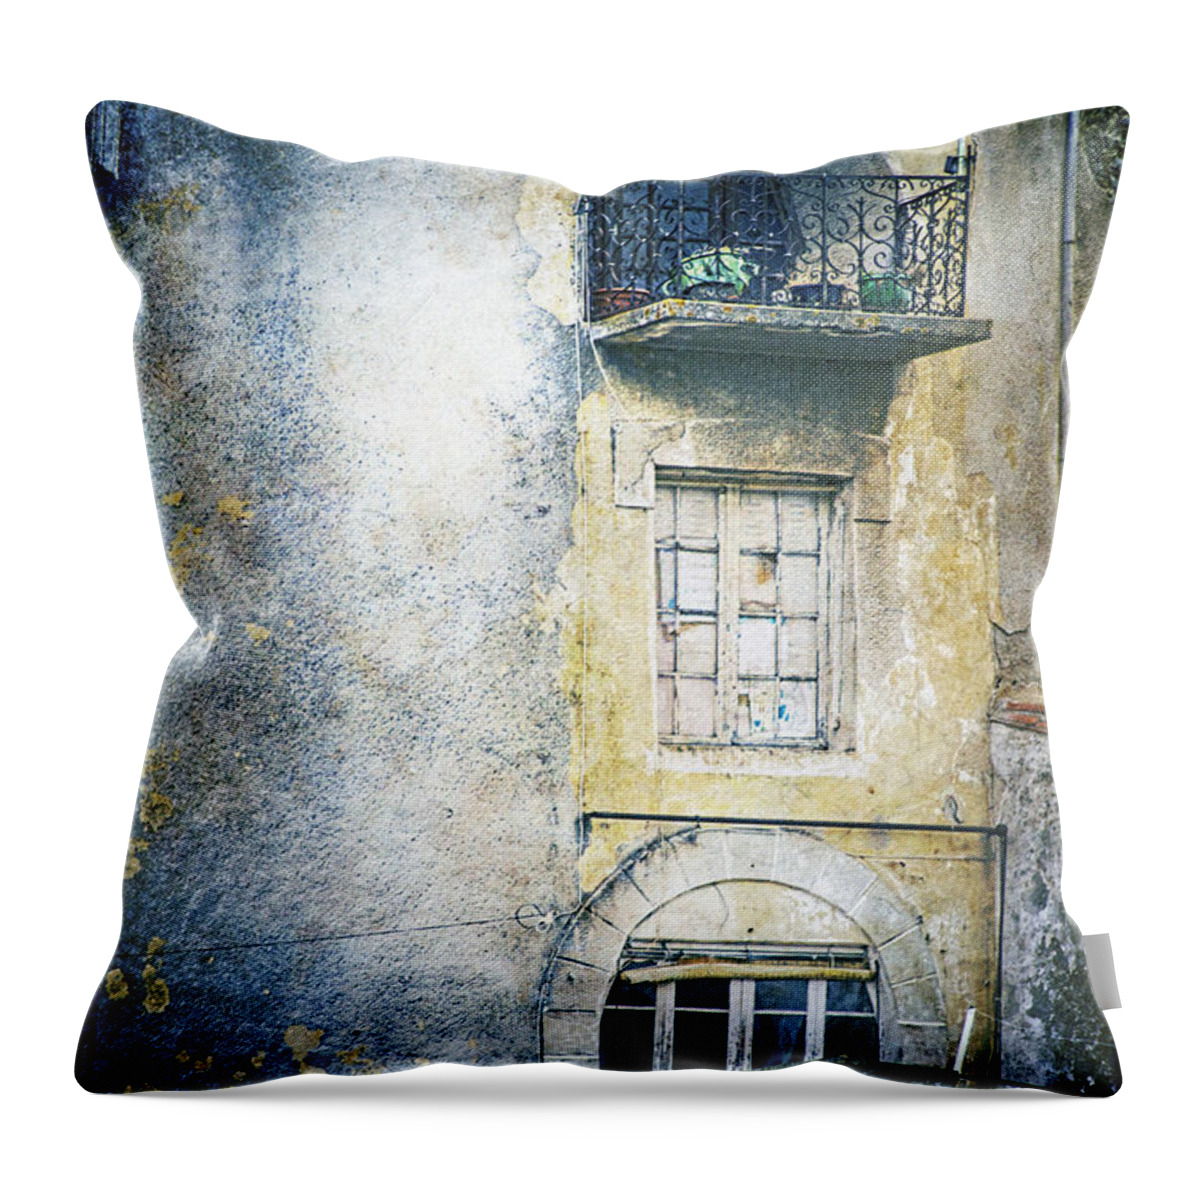 Window Throw Pillow featuring the photograph The Balcony Scene by Heiko Koehrer-Wagner